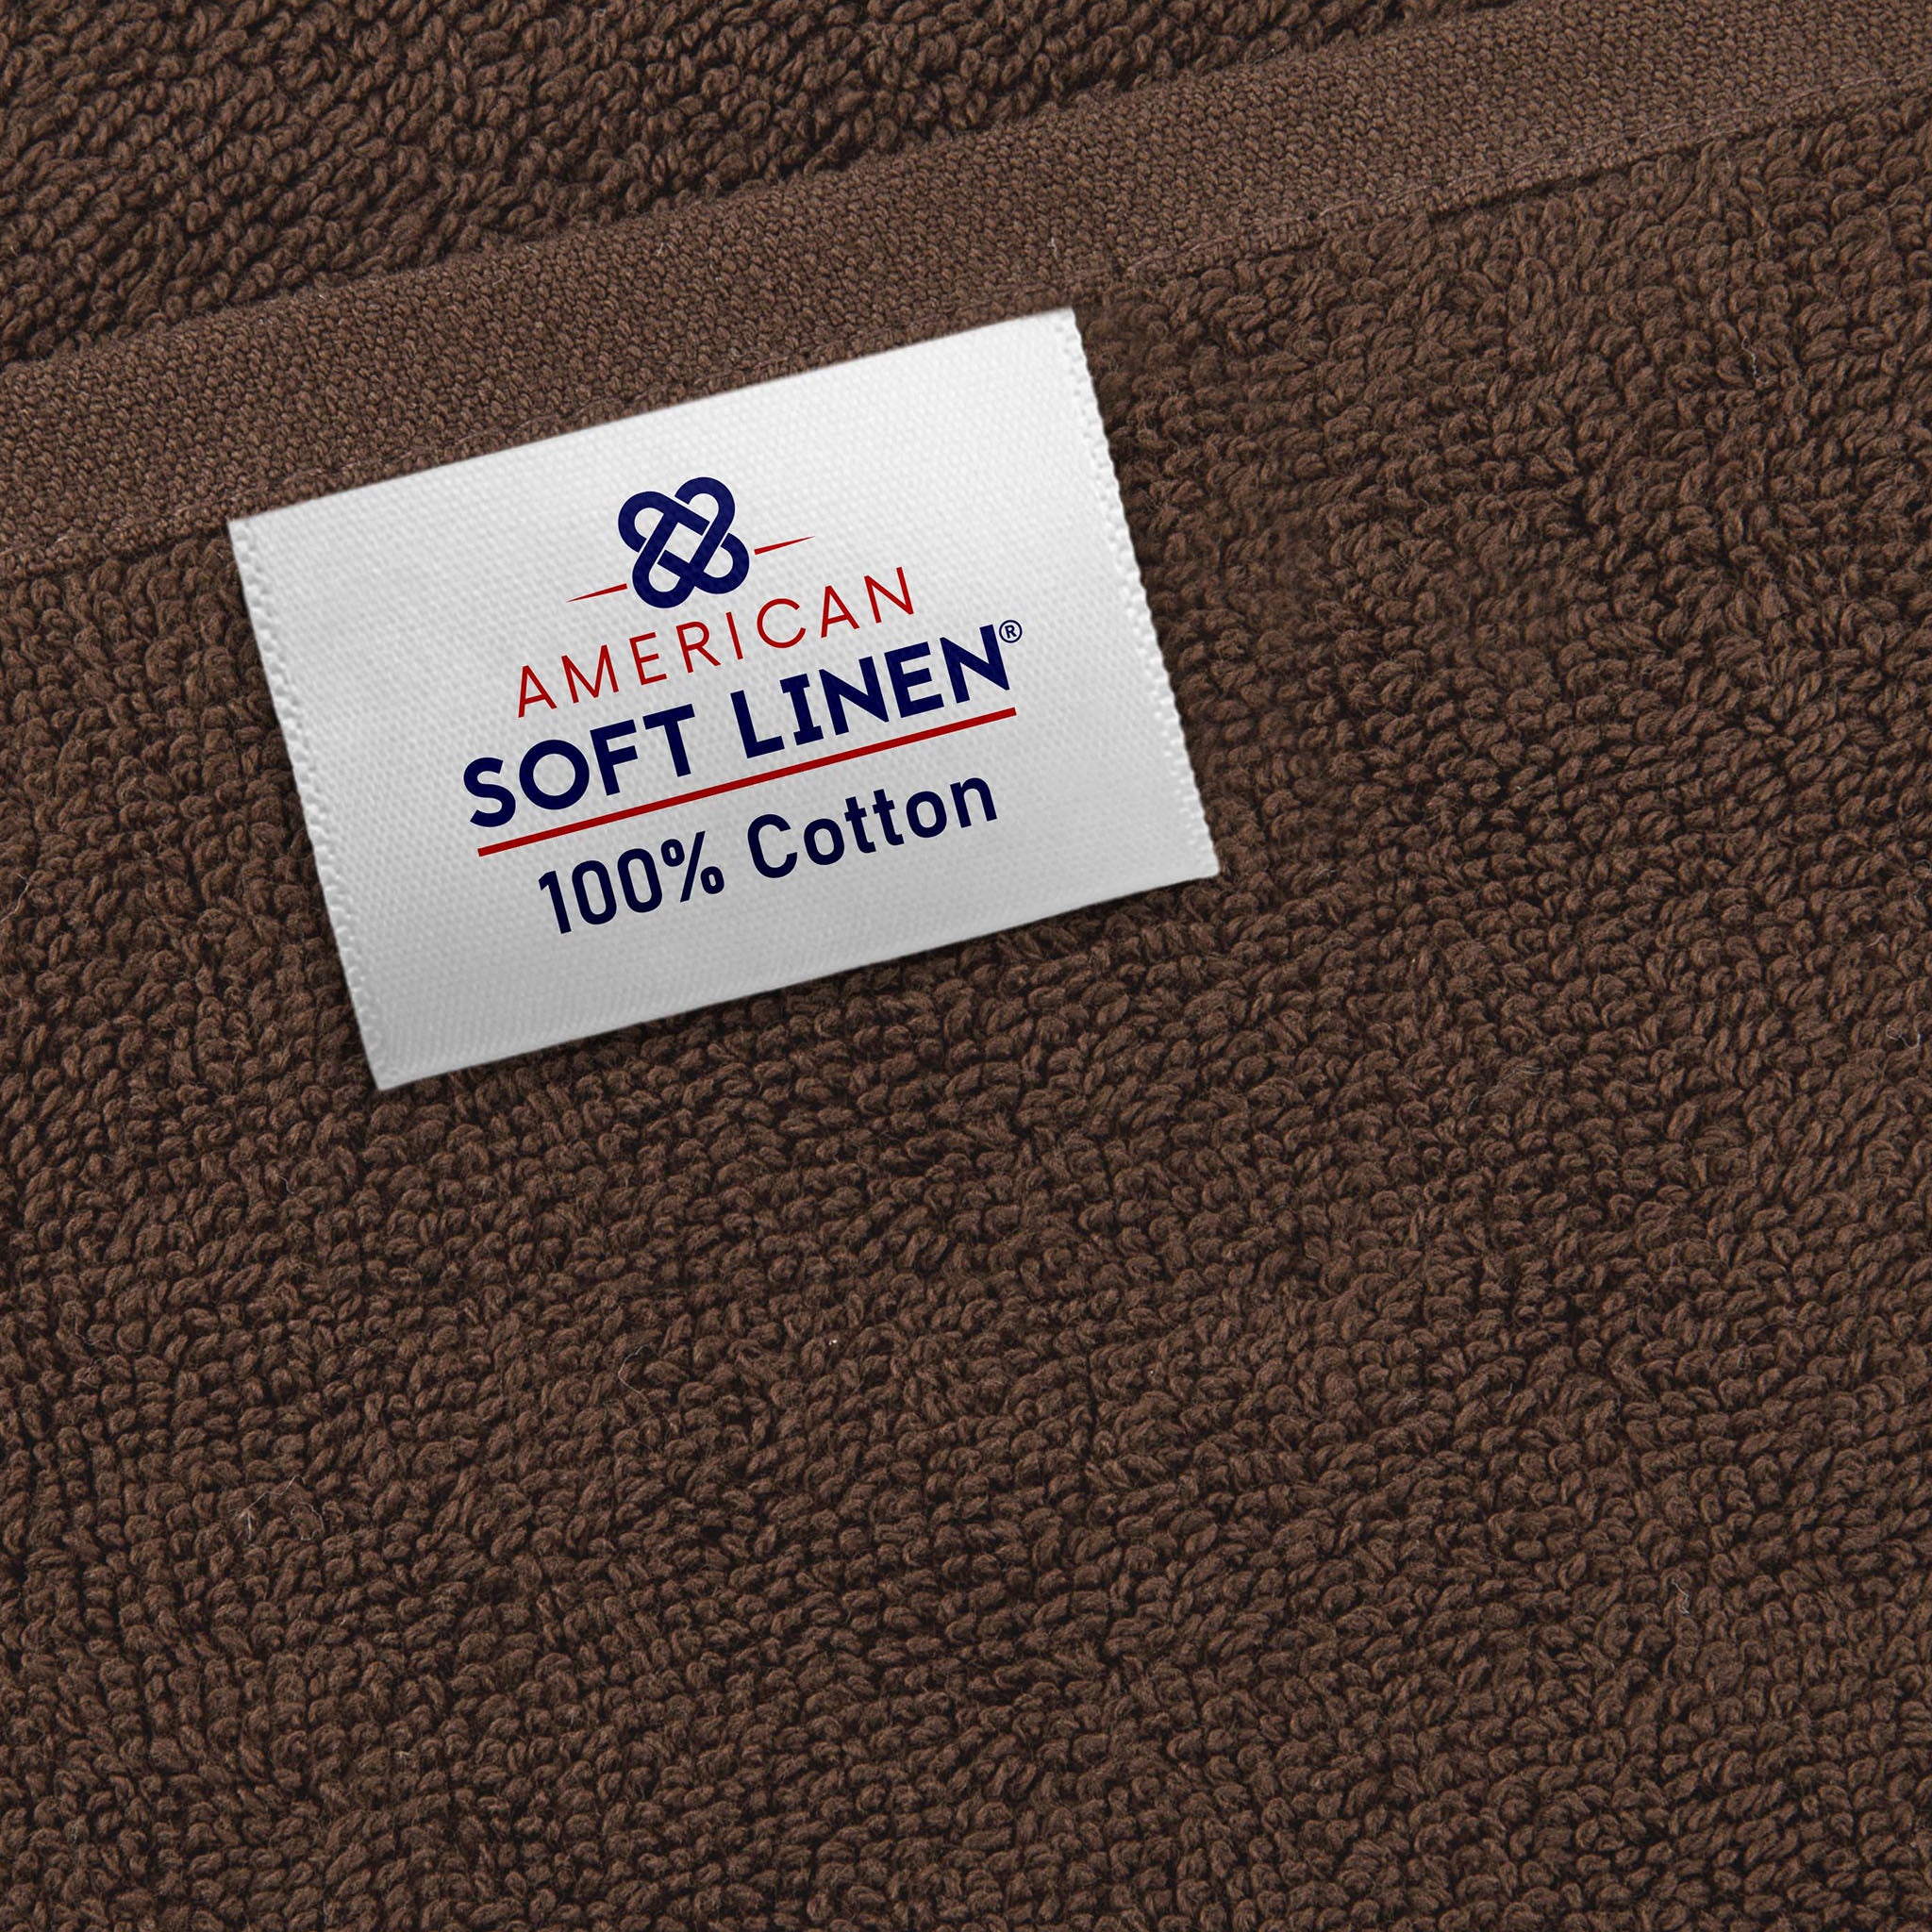 American Soft Linen 100% Ring Spun Cotton 40x80 Inches Oversized Bath Sheets chocolate-brown-6